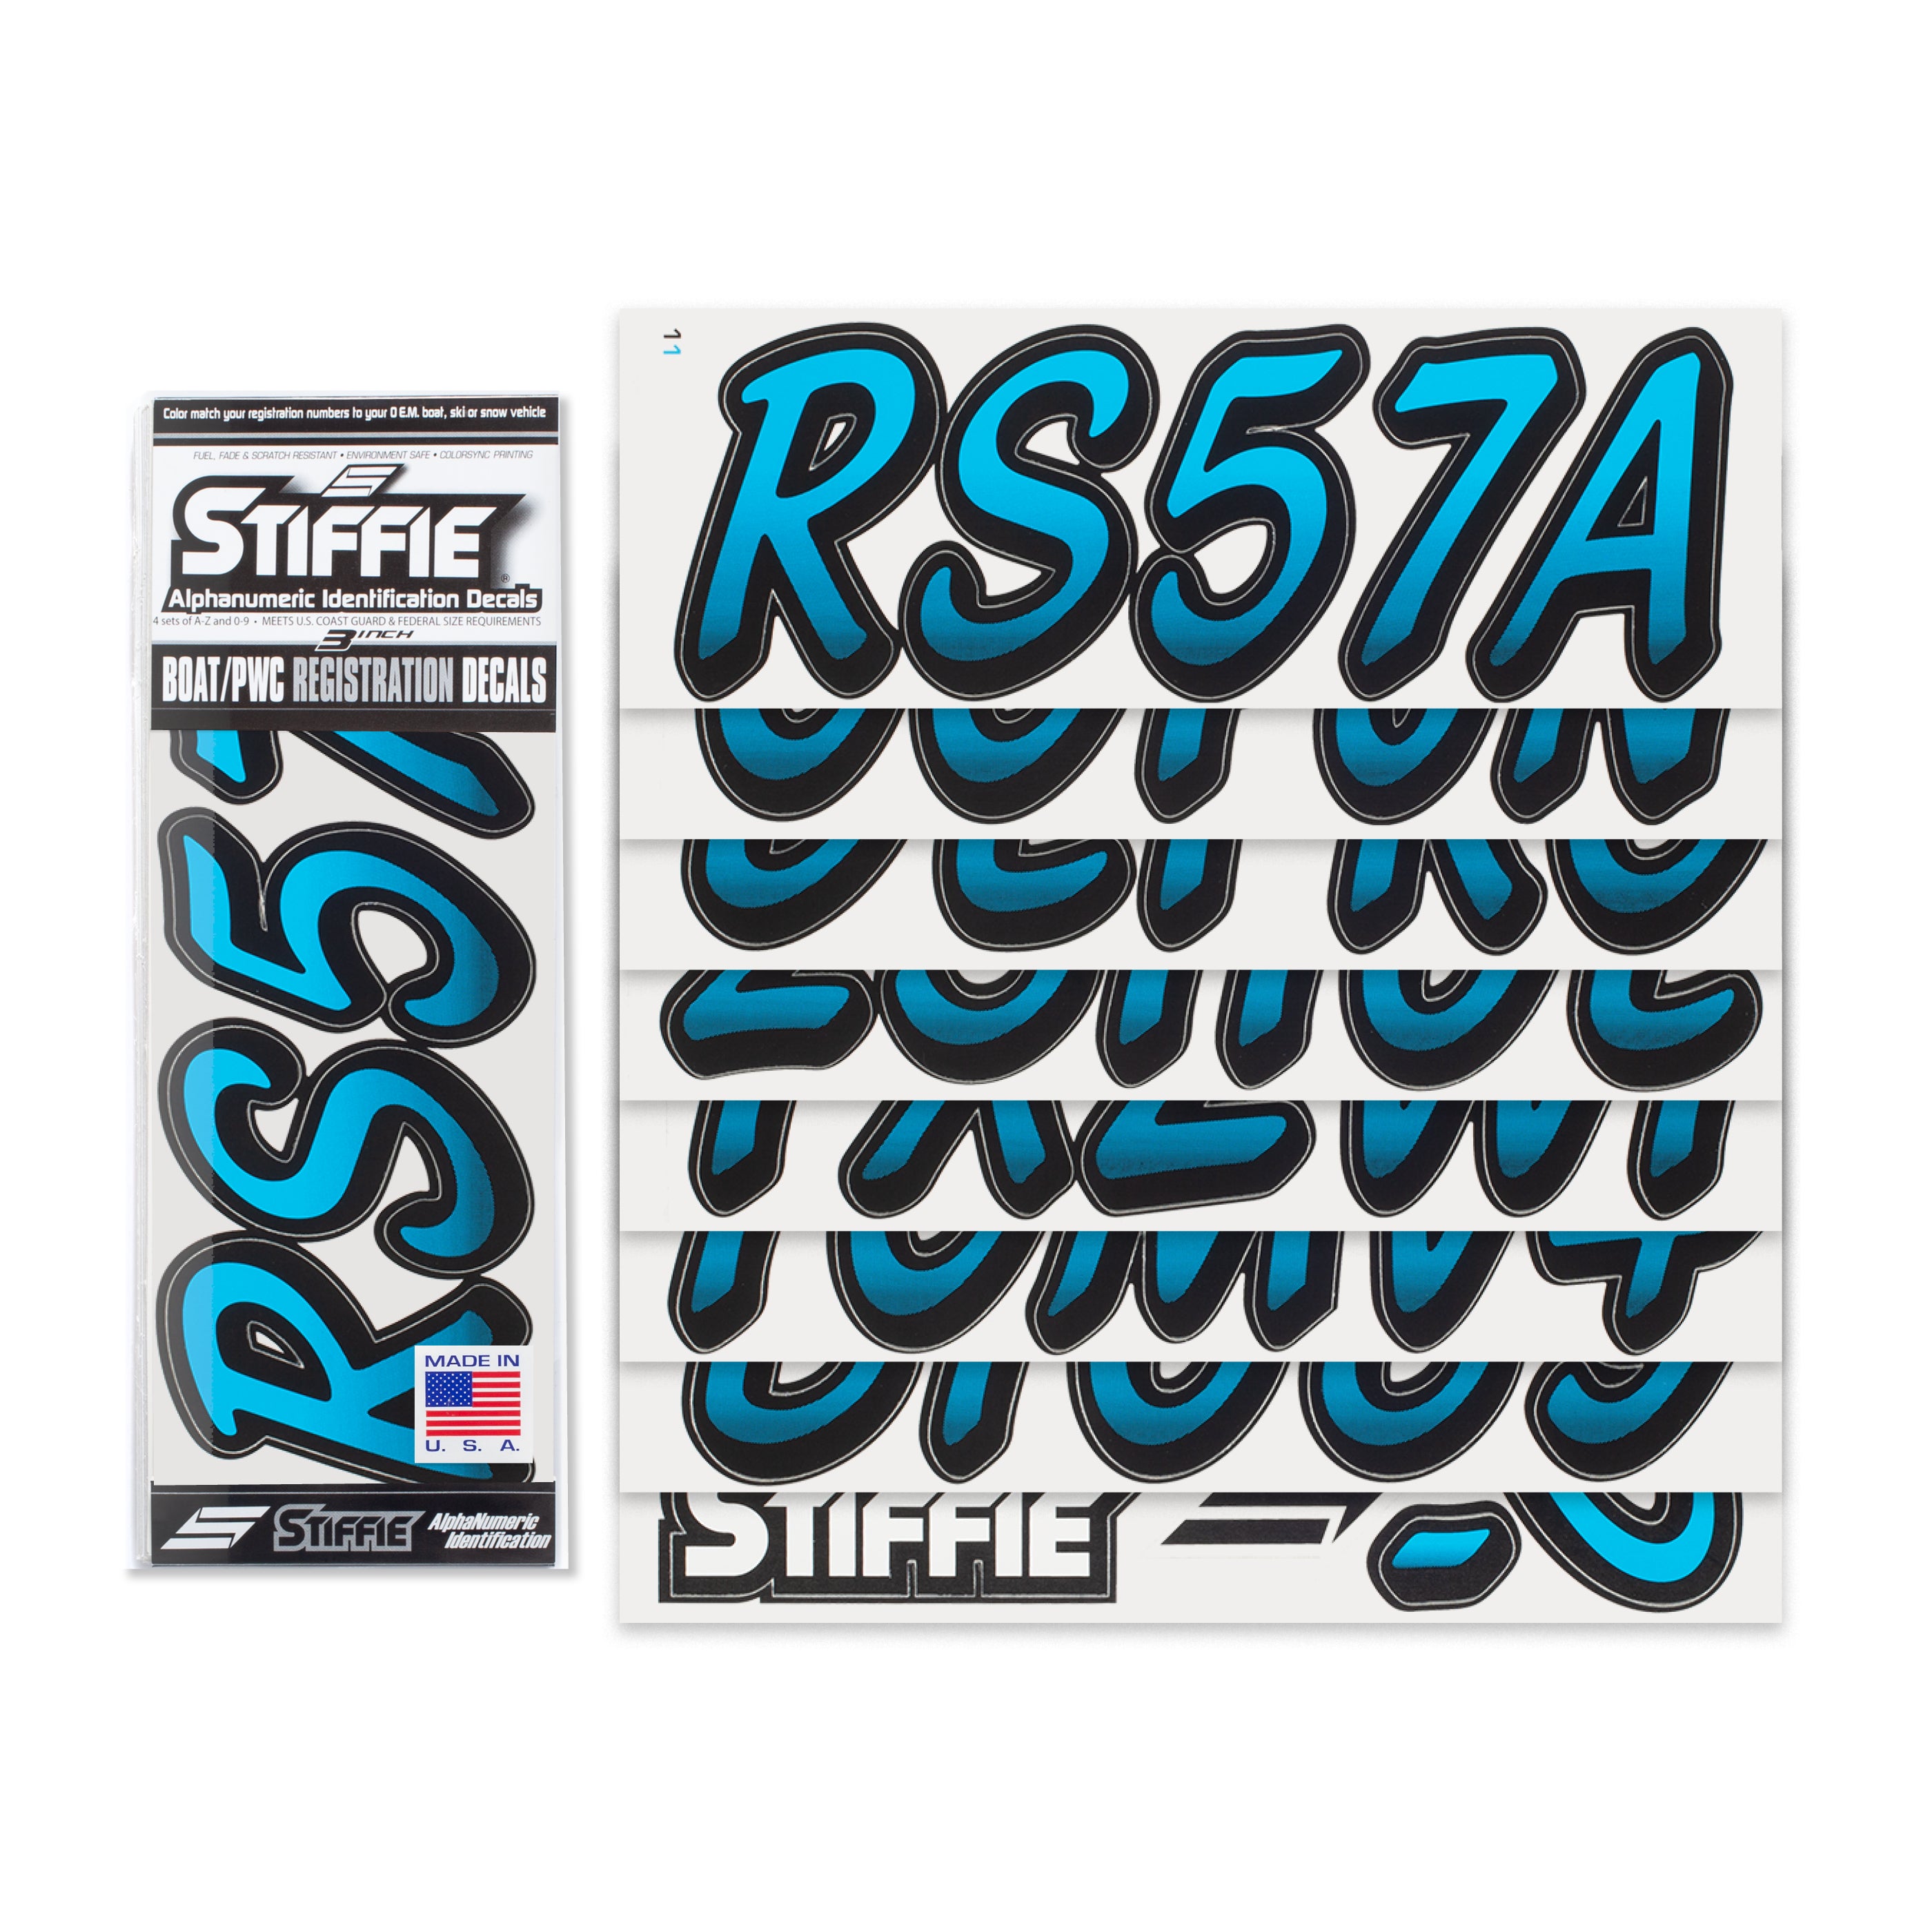 STIFFIE Whipline Sky Blue/Black 3" Alpha-Numeric Registration Identification Numbers Stickers Decals for Boats & Personal Watercraft